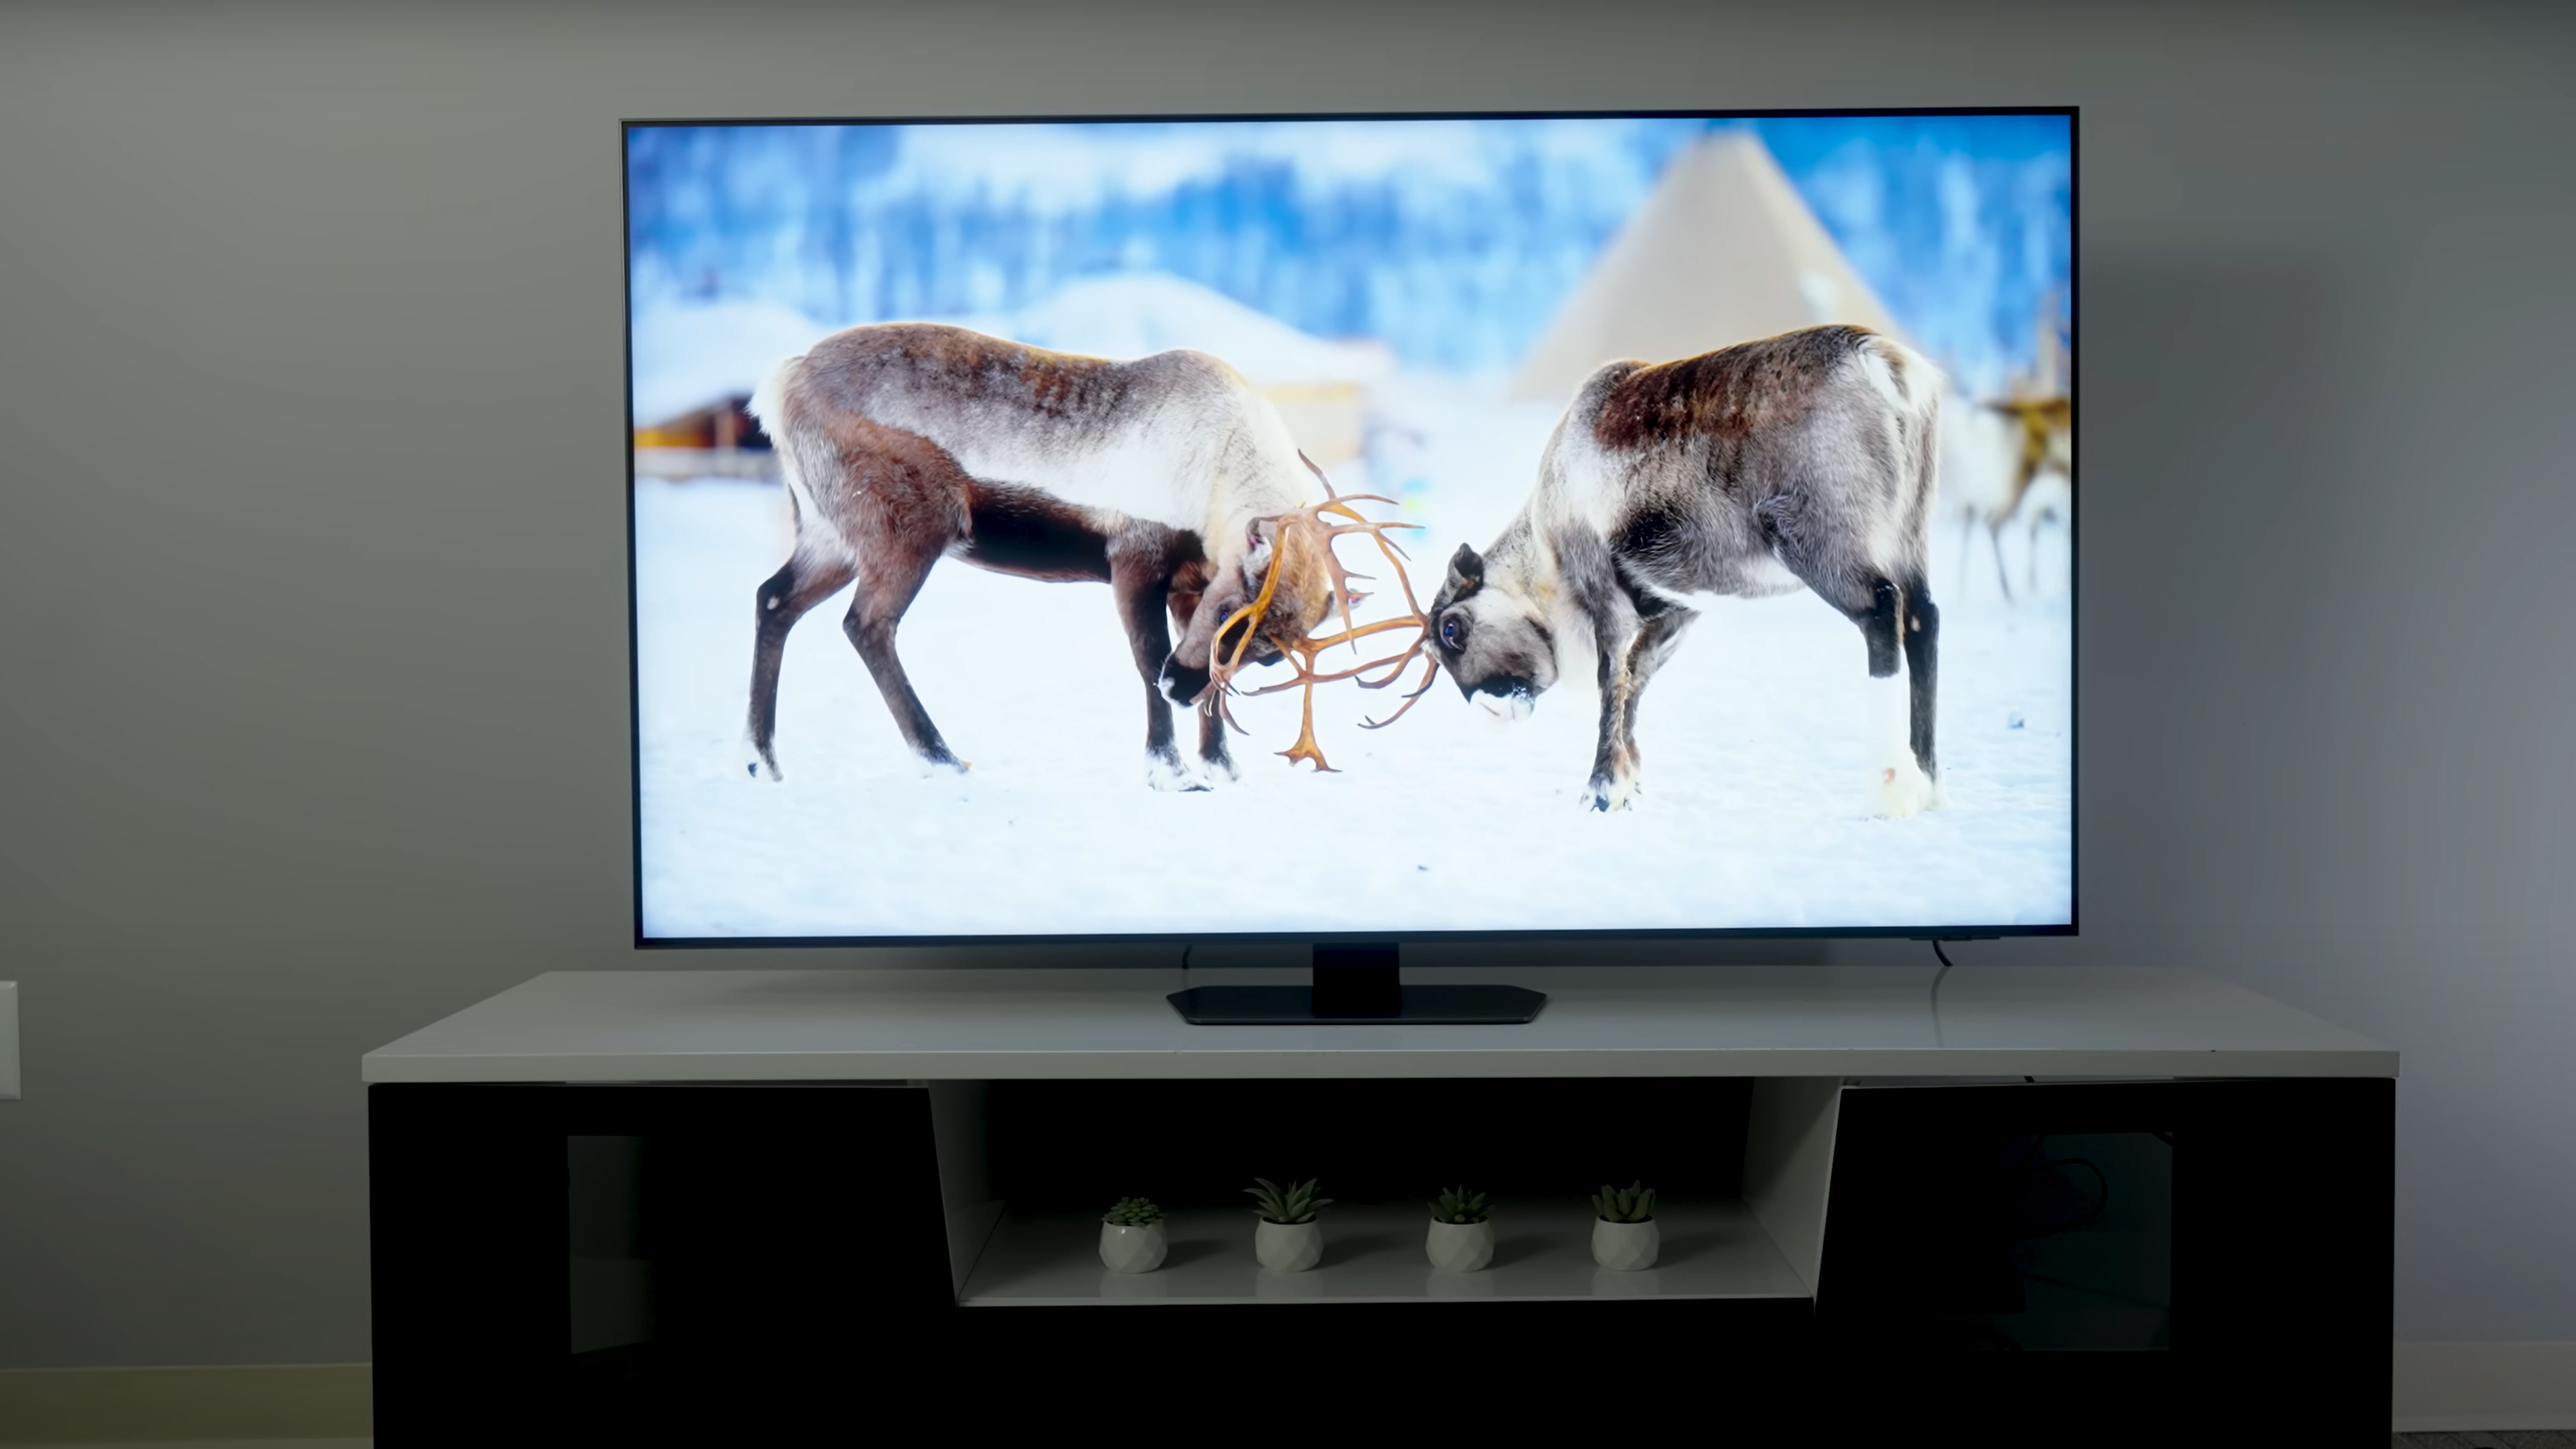 Two majestic elk lock horns in a snowy scene shown on a Samsung QN90D.